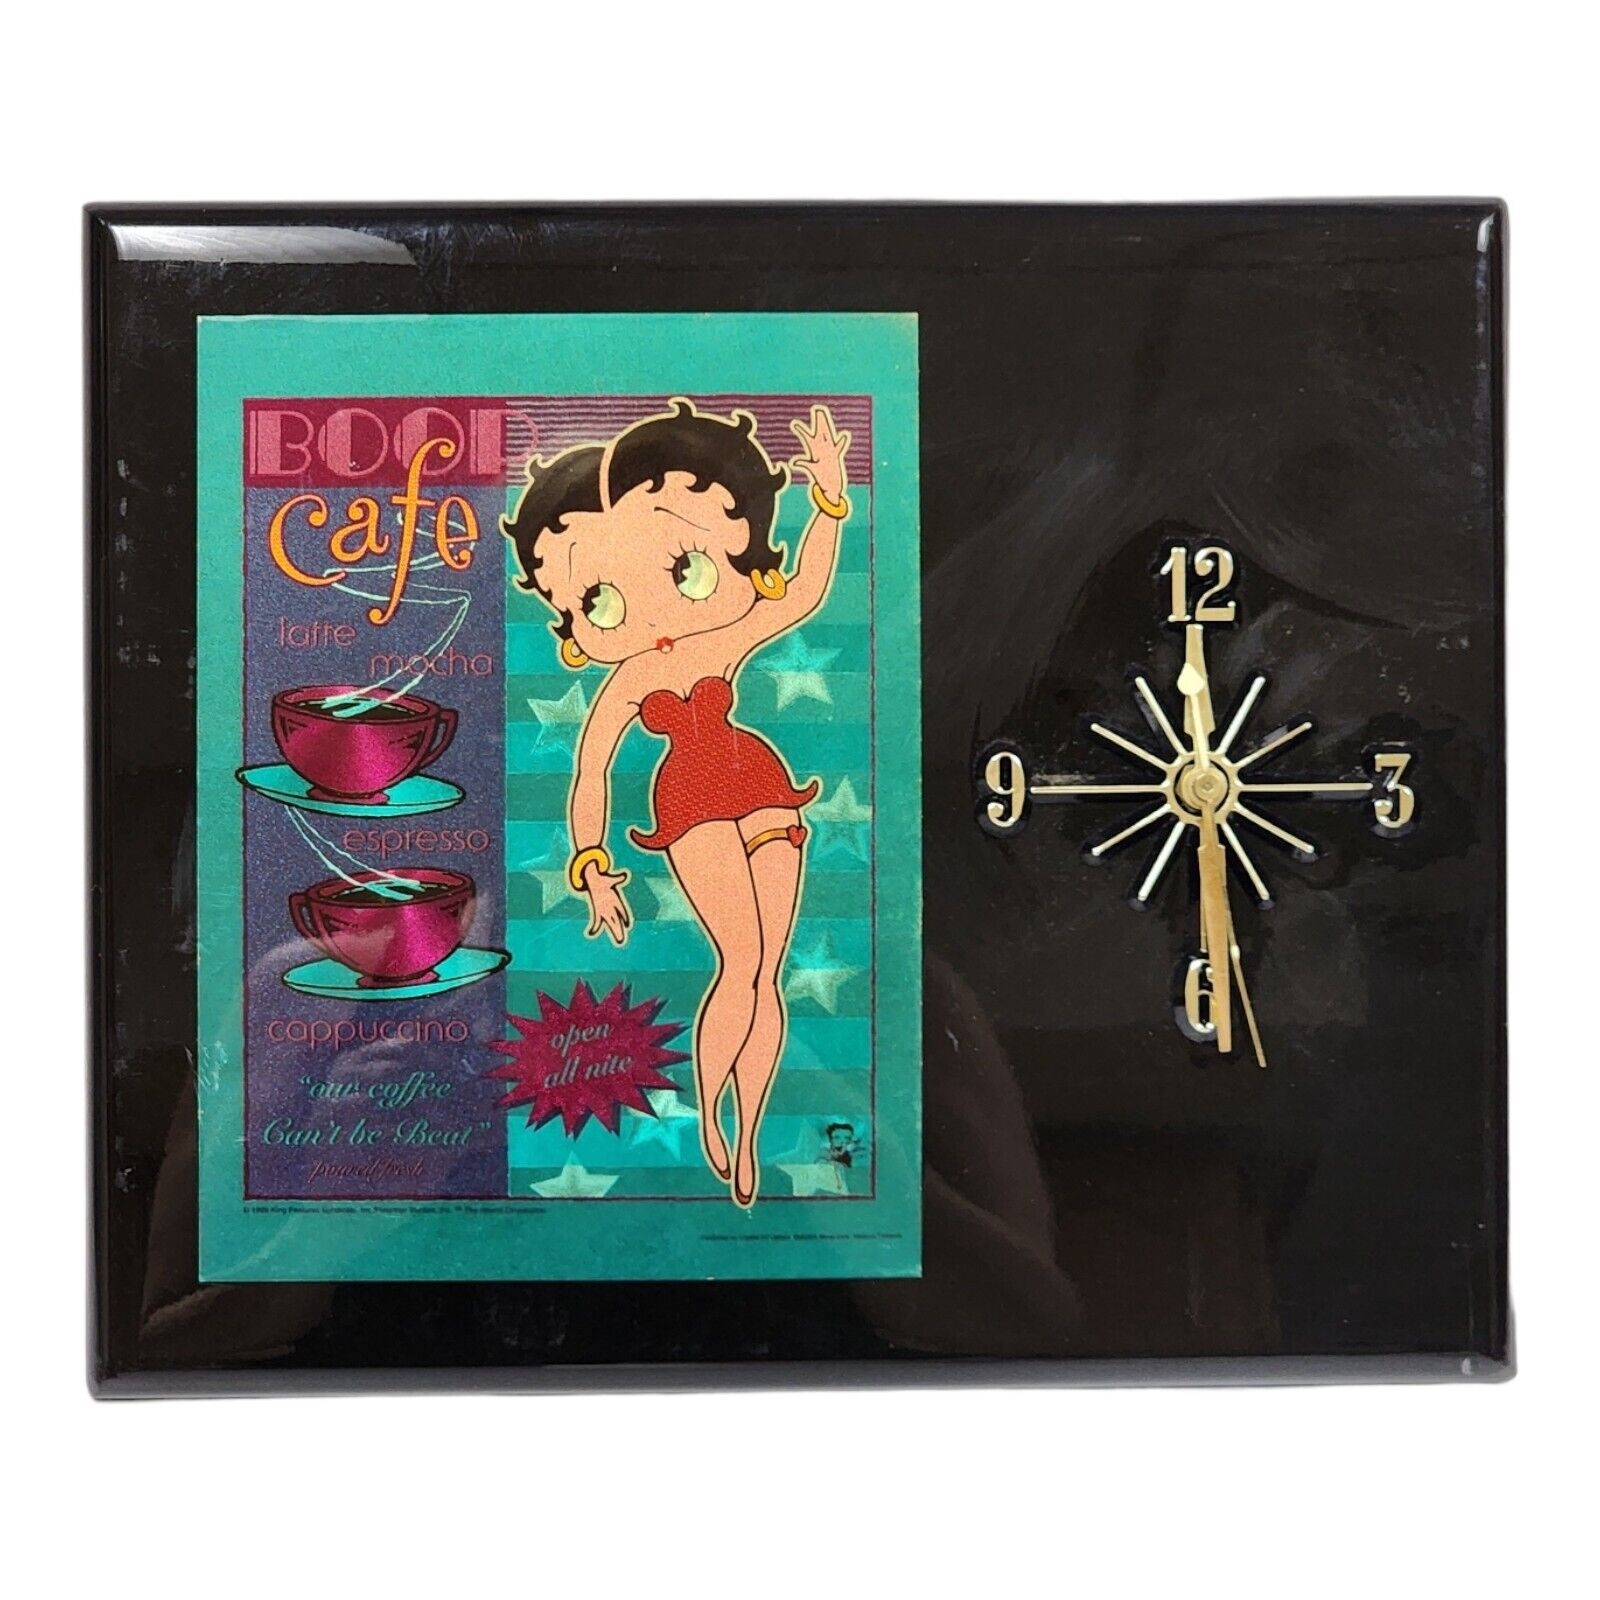 Betty Boop Cafe Wall Clock Black Lacquered Wood Latte Mocha Coffee Theme Vtg